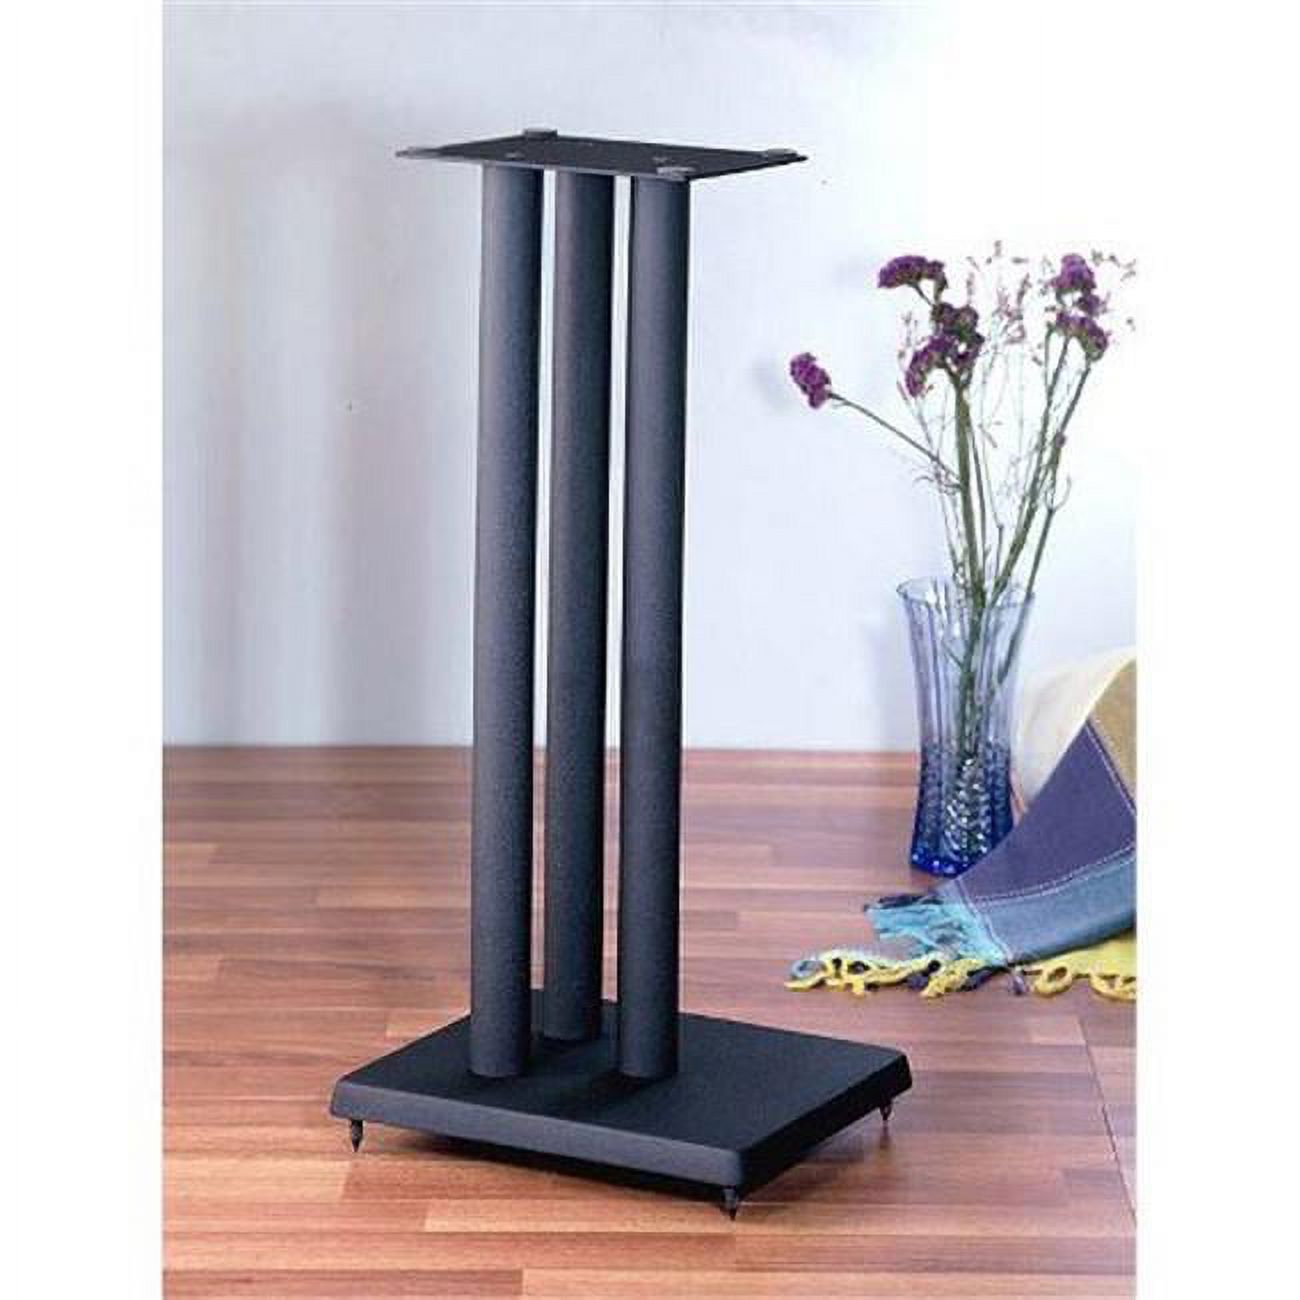 24 in. H, Iron Center Channel Speaker Stand - Black - image 1 of 1